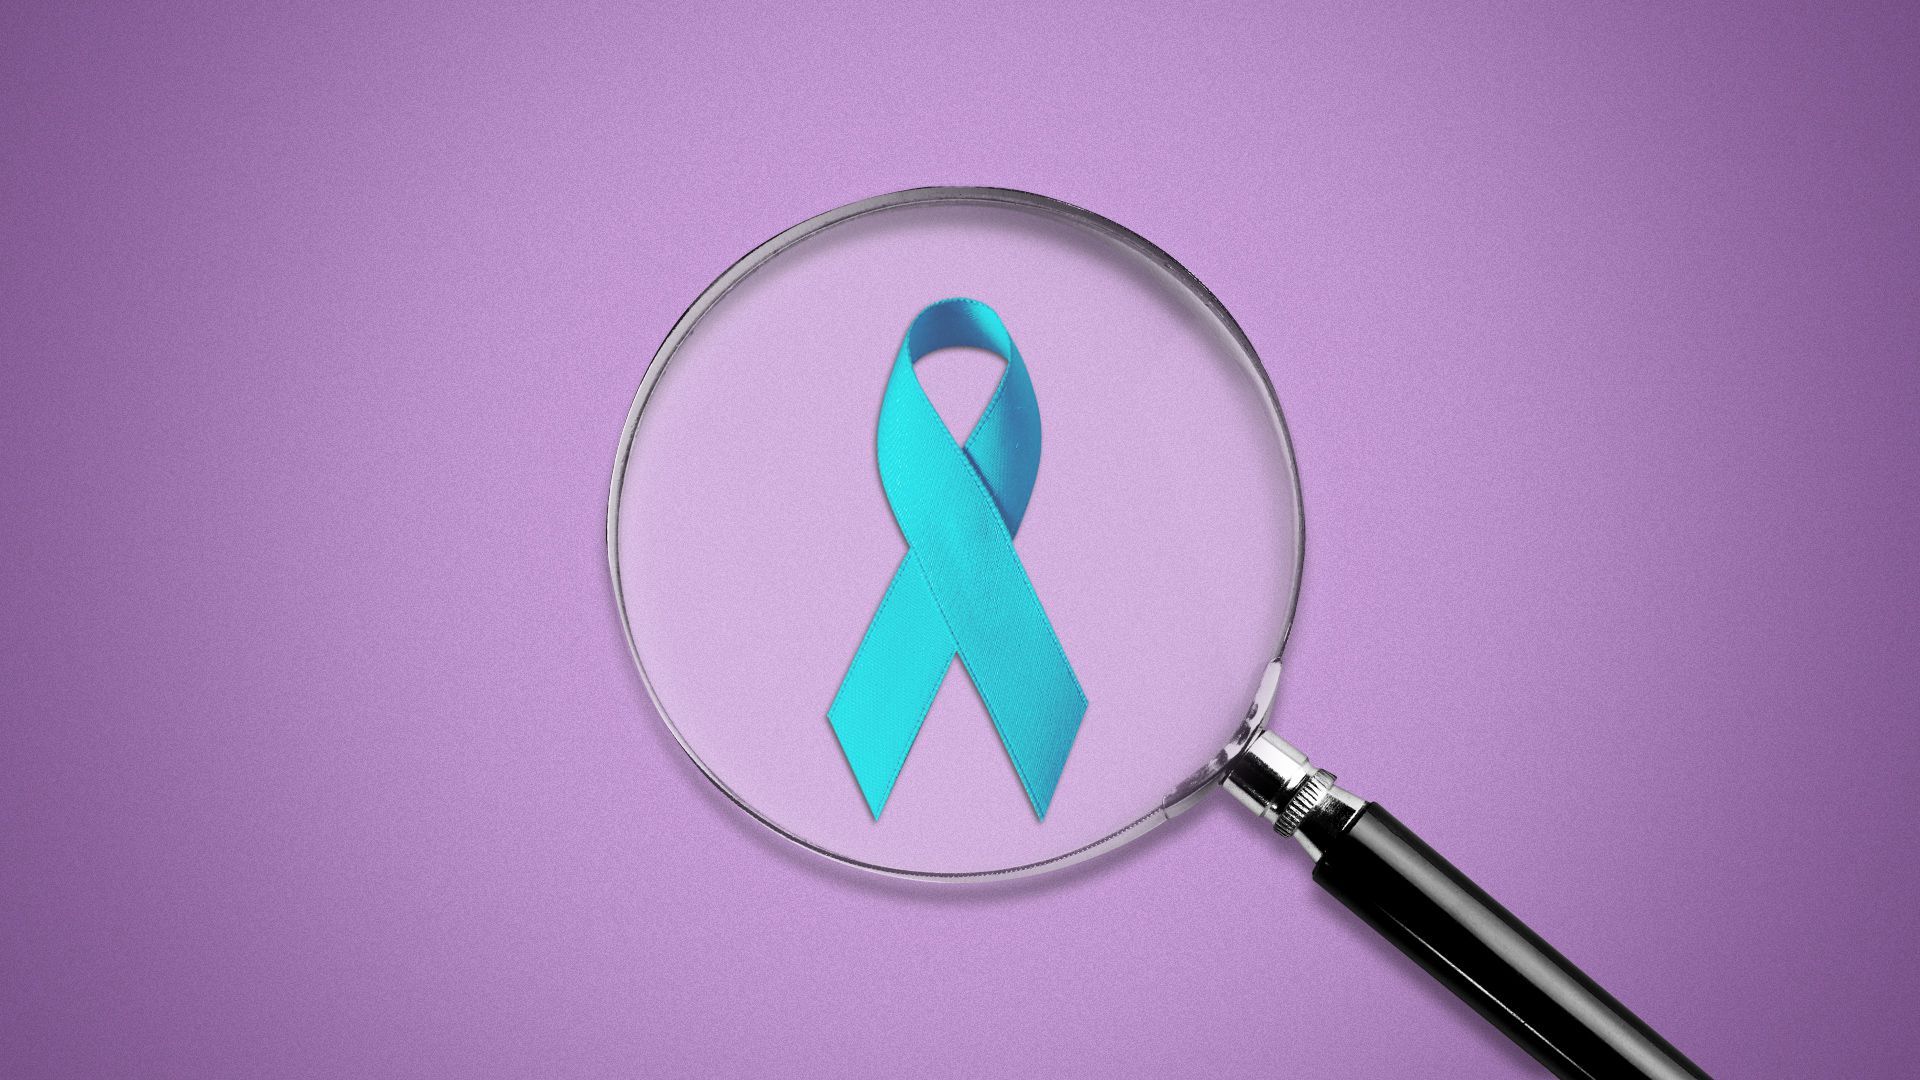 Illustration of a magnifying glass examining a small cervical cancer ribbon.  